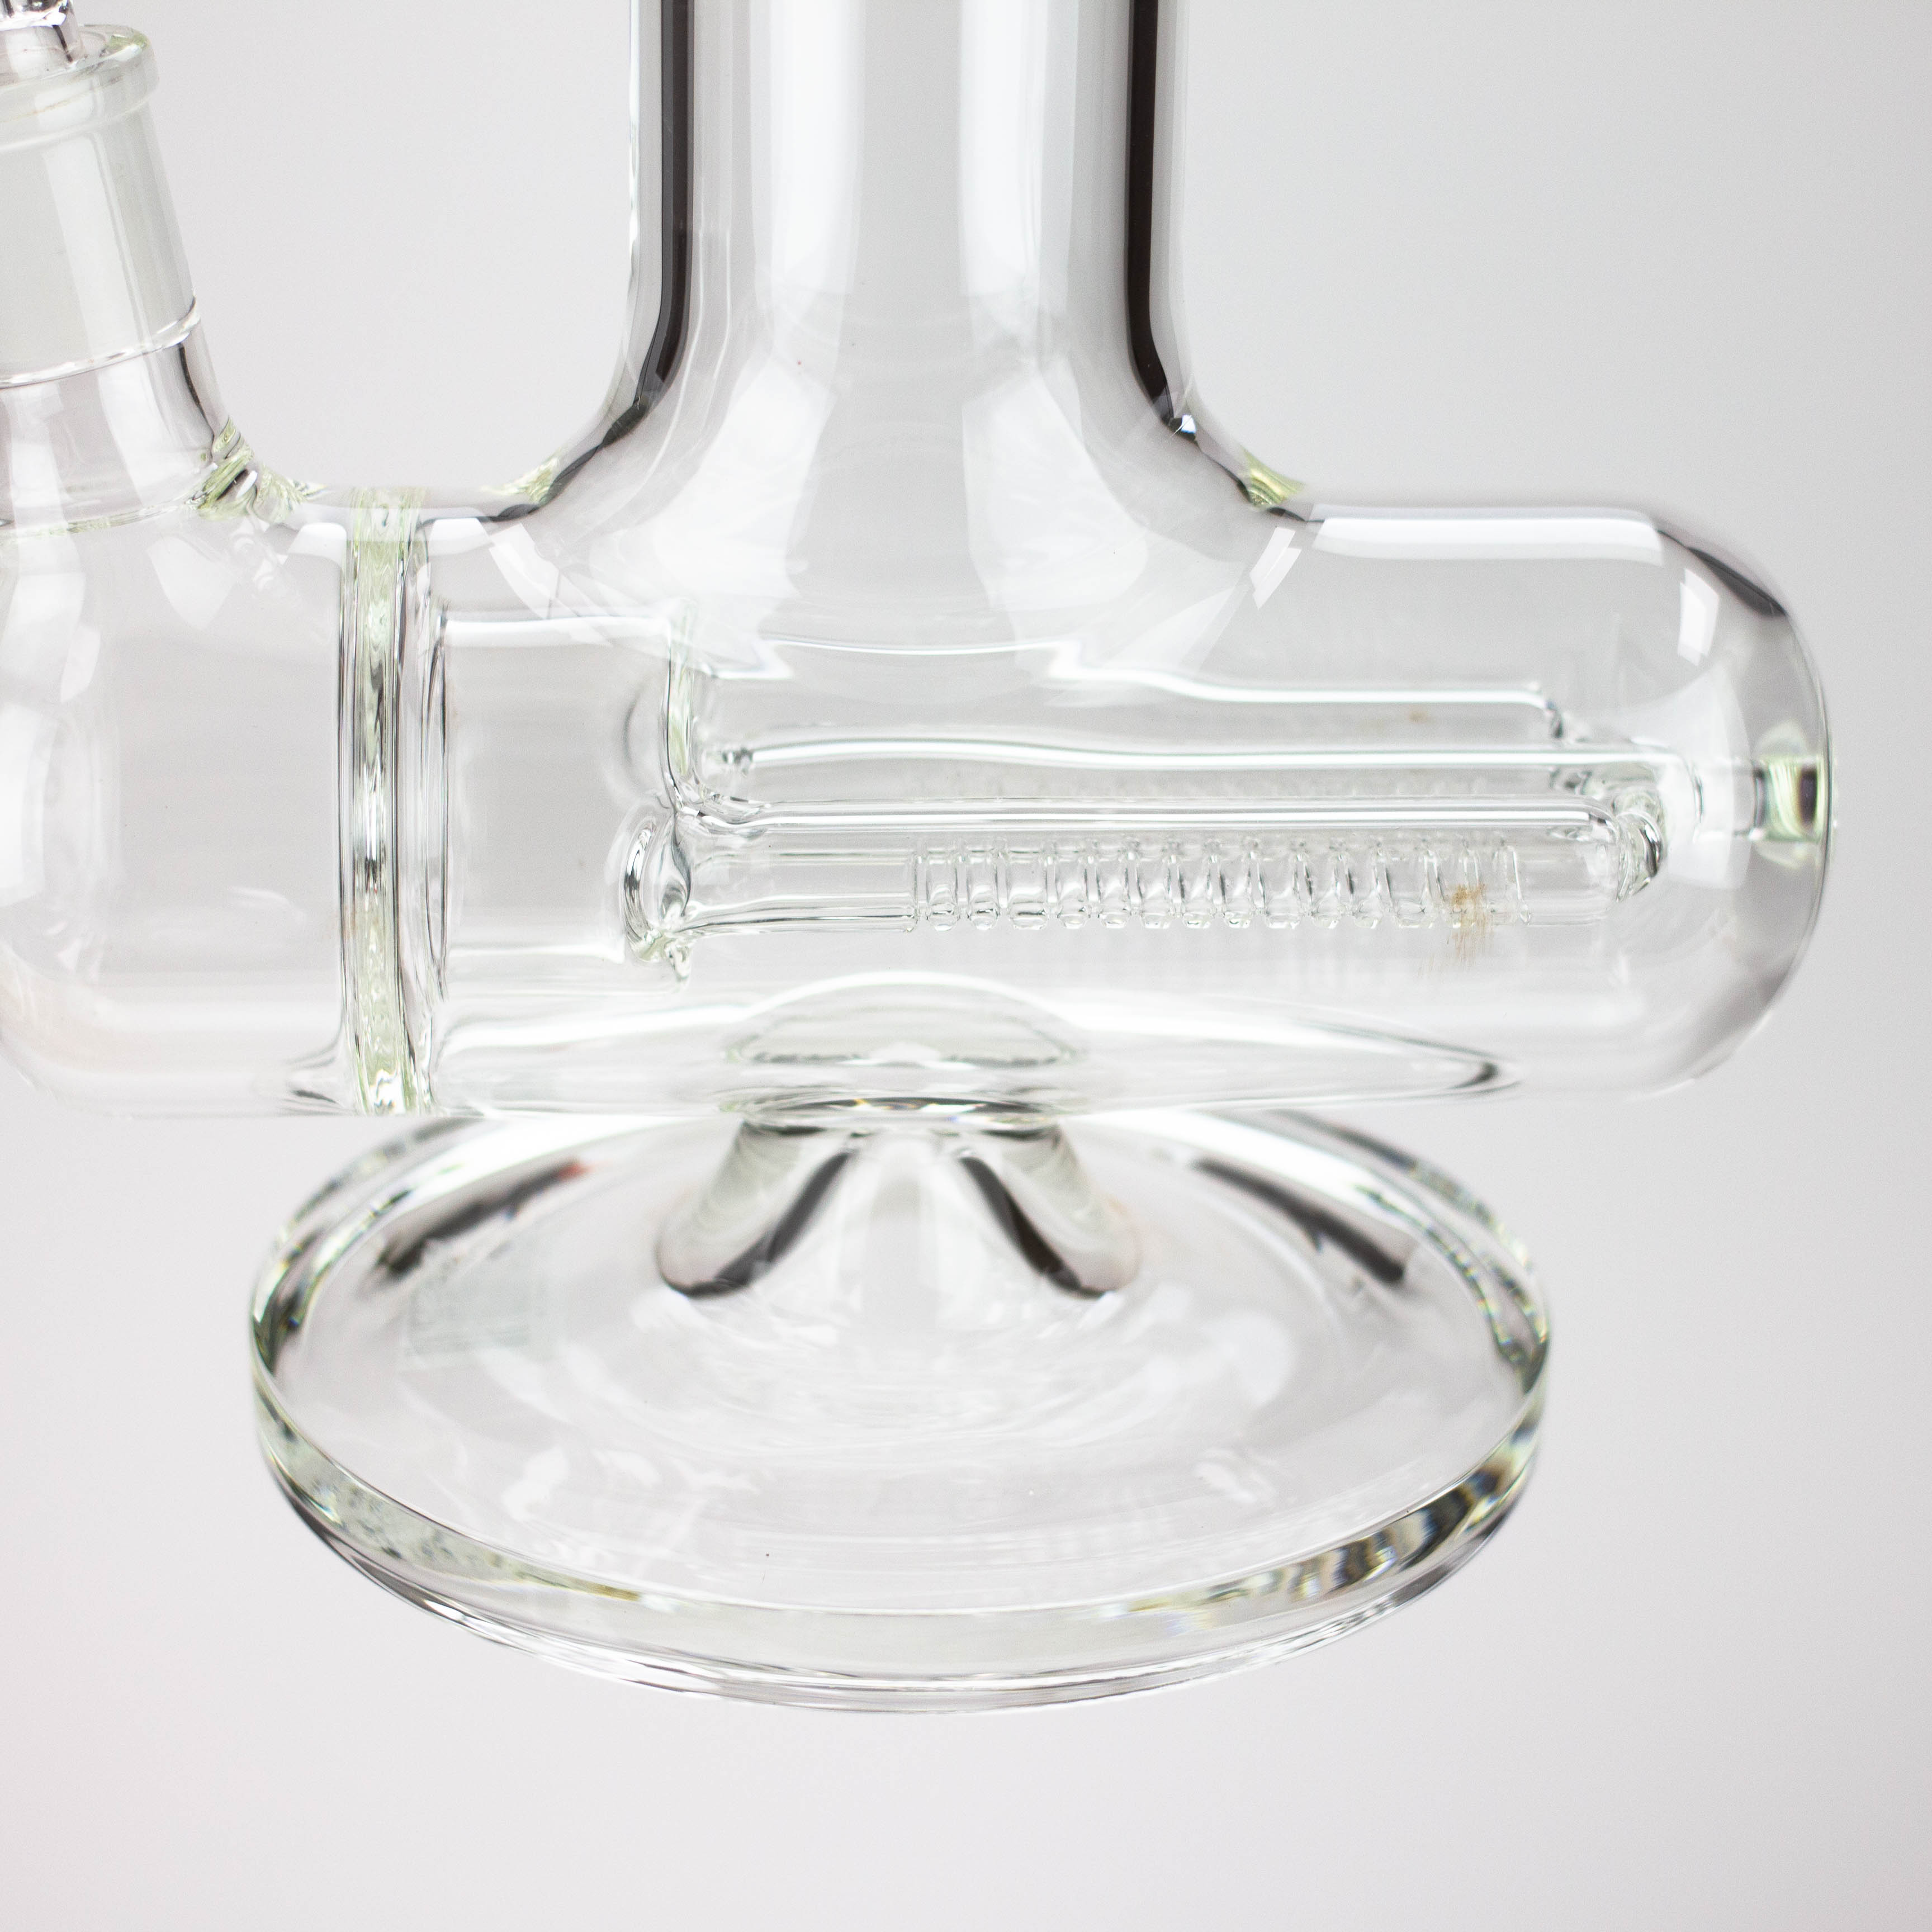 preemo - 20 inch Dome Over Triple Inline to Tree Perc_4